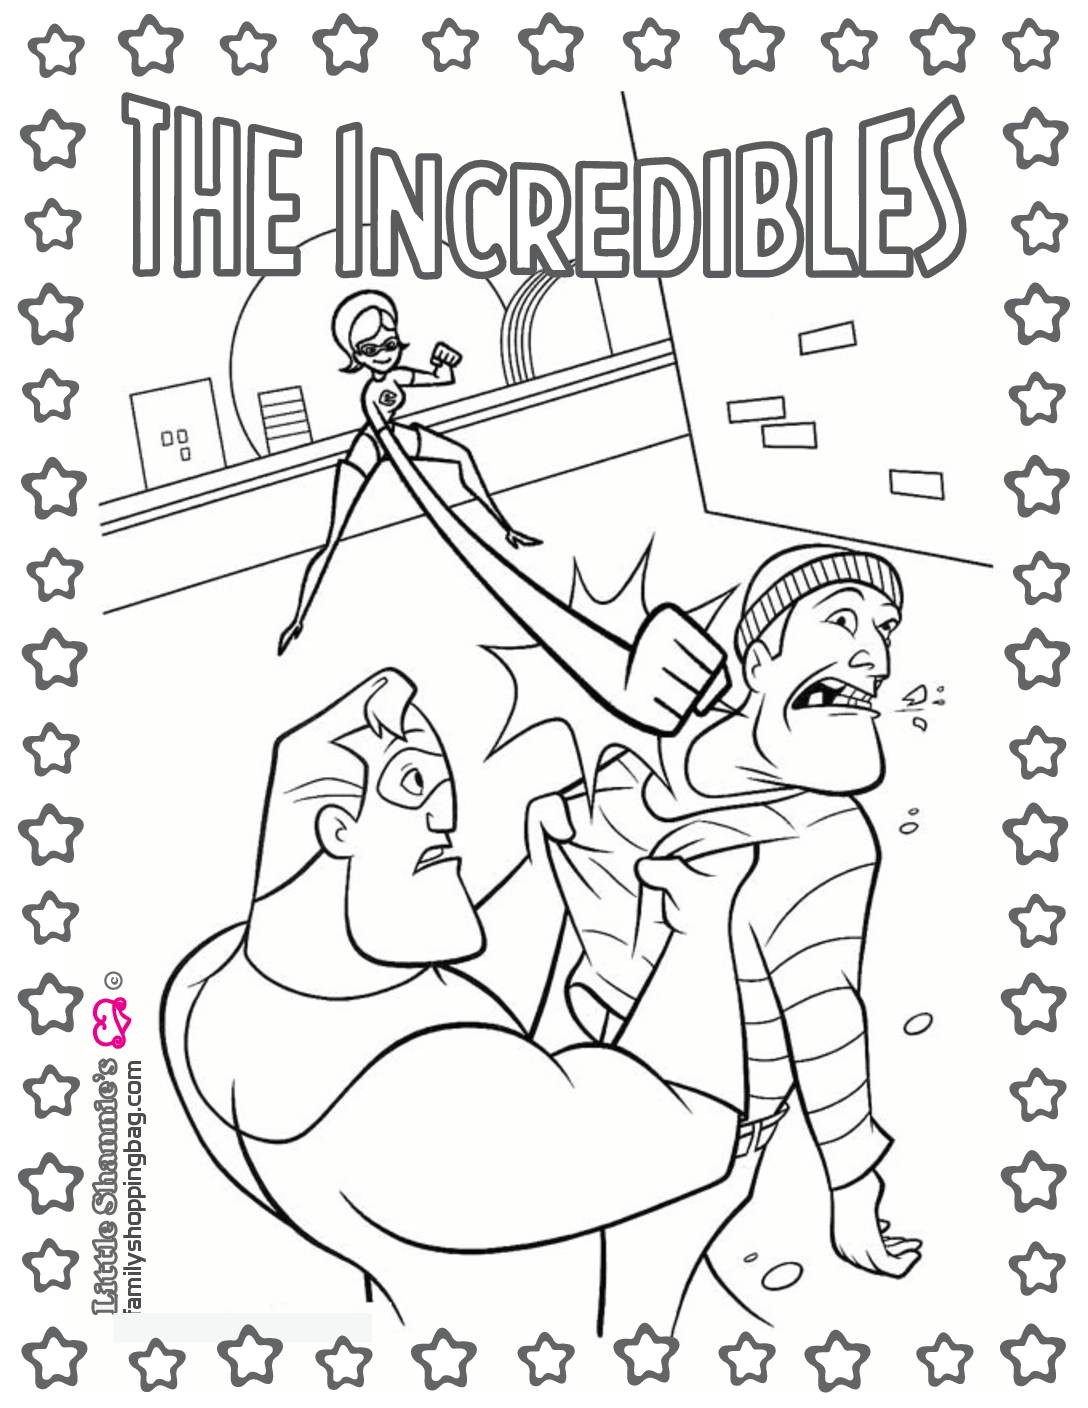 Coloring Page 4 Incredibles Coloring Pages